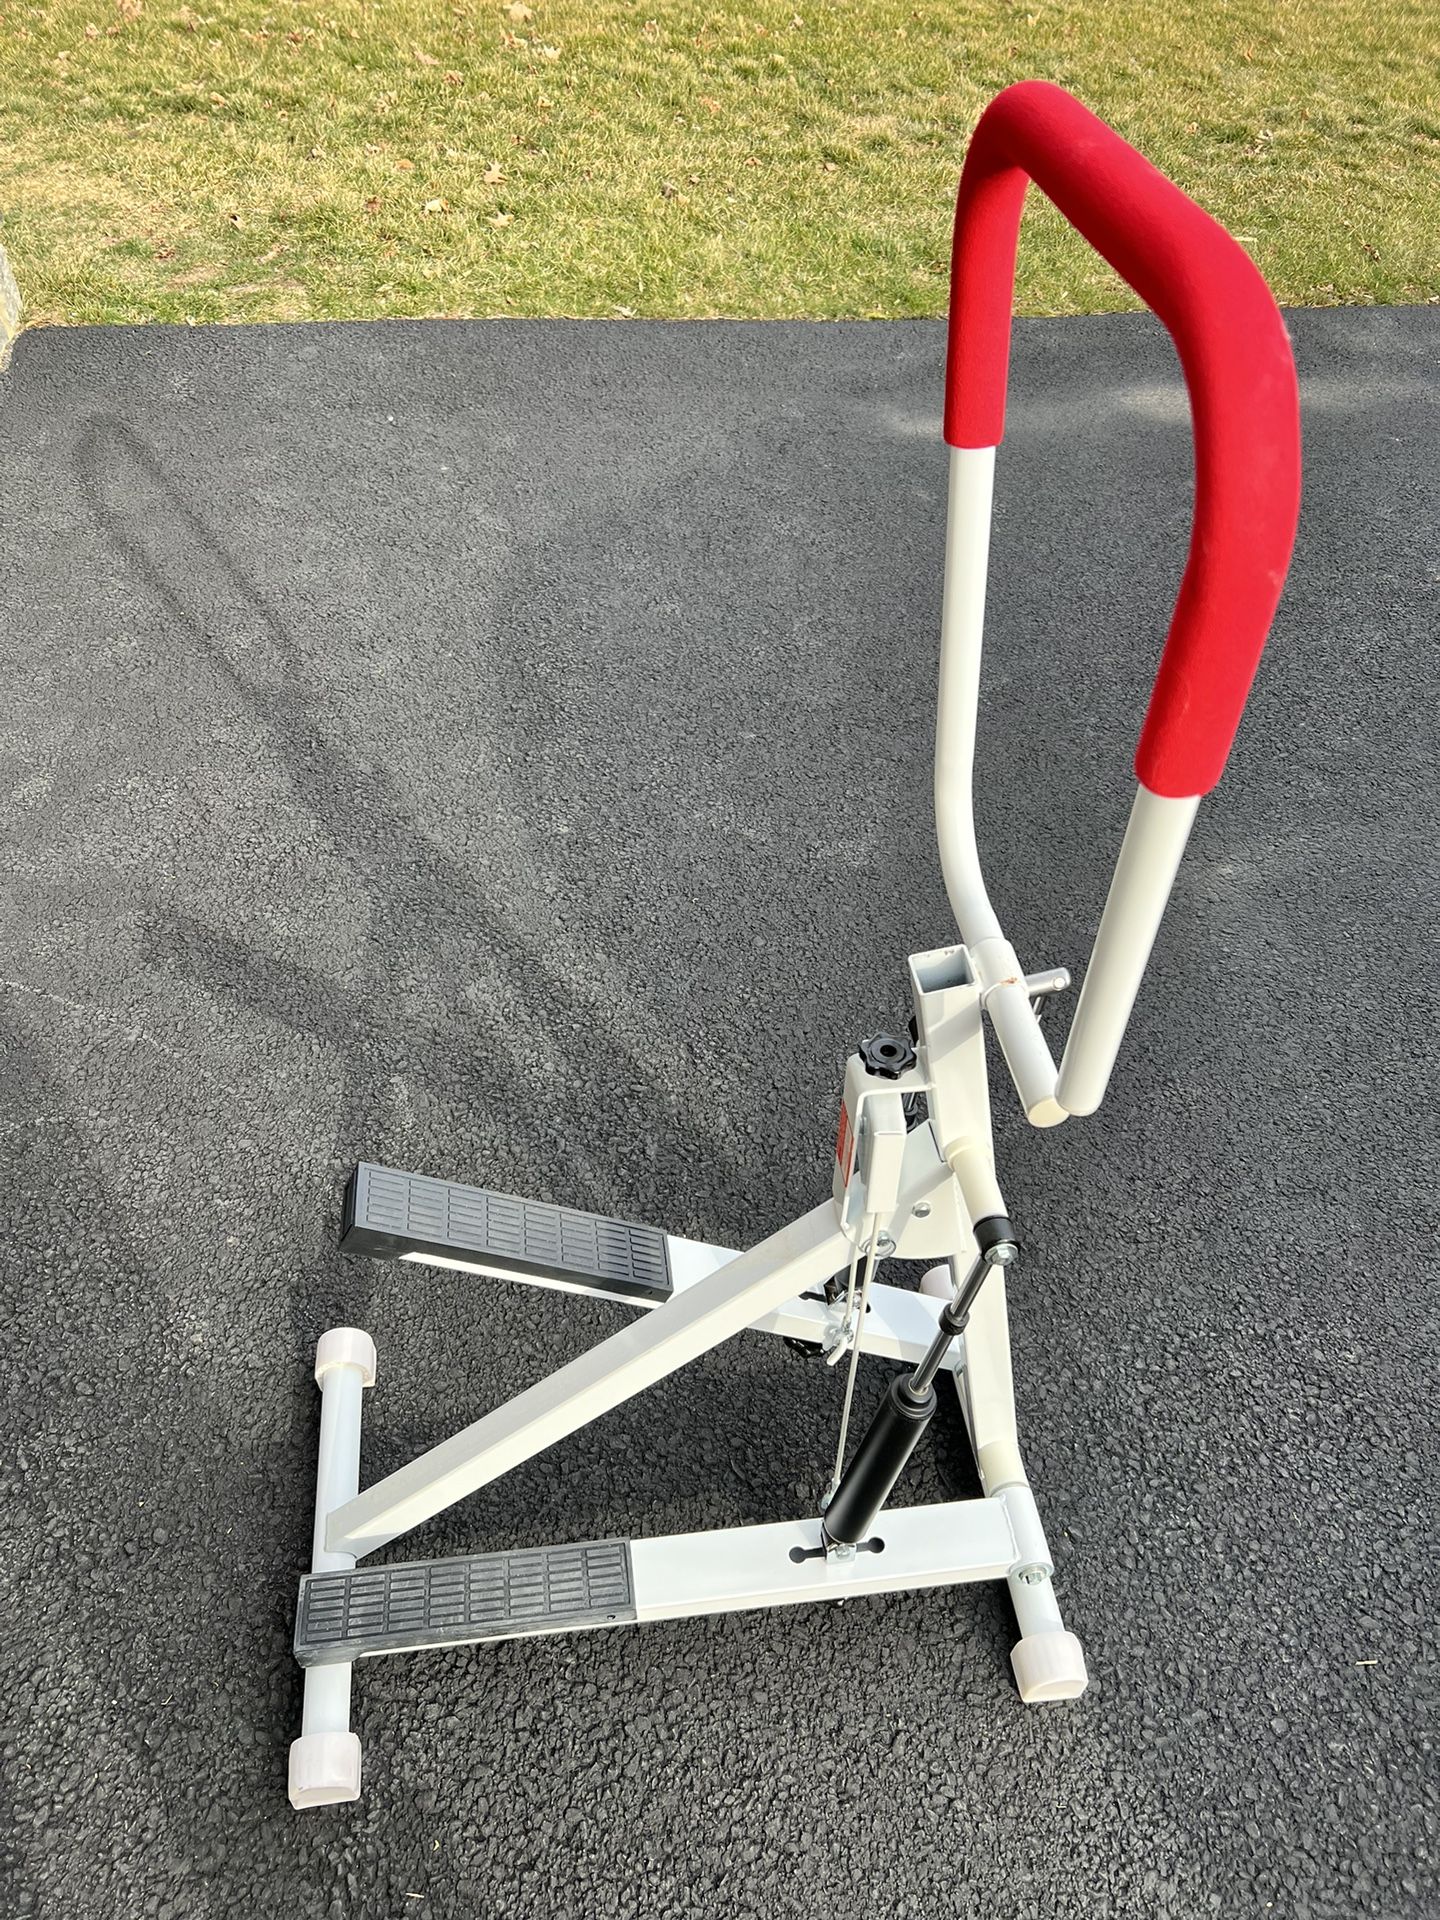 Brand new Fitness Stair Stepper with Handle. 